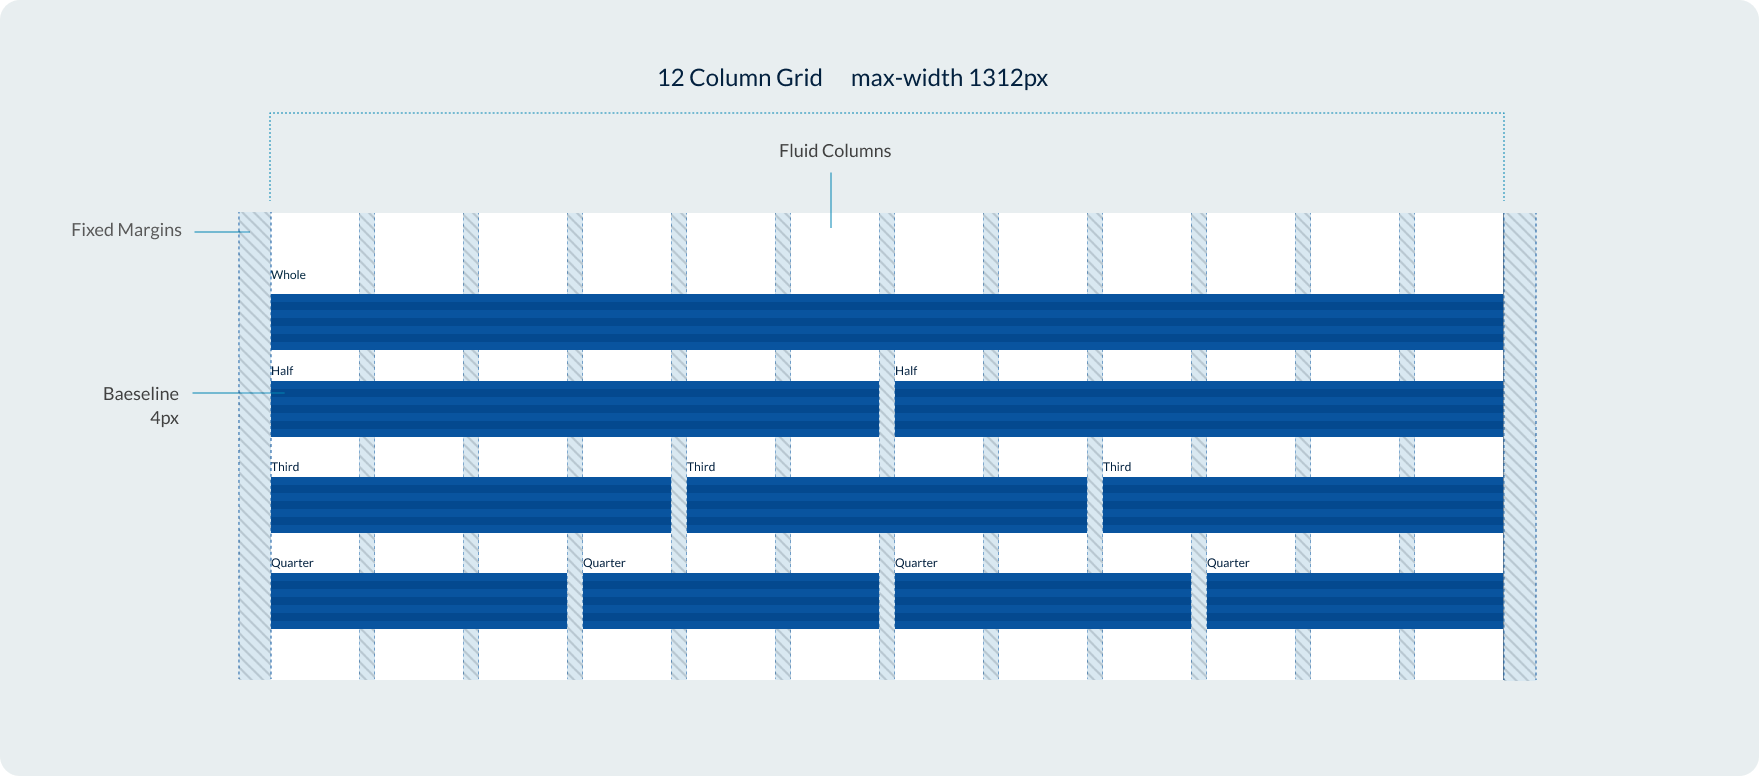 Illustration of design system gird, showing 12 cols and max-width